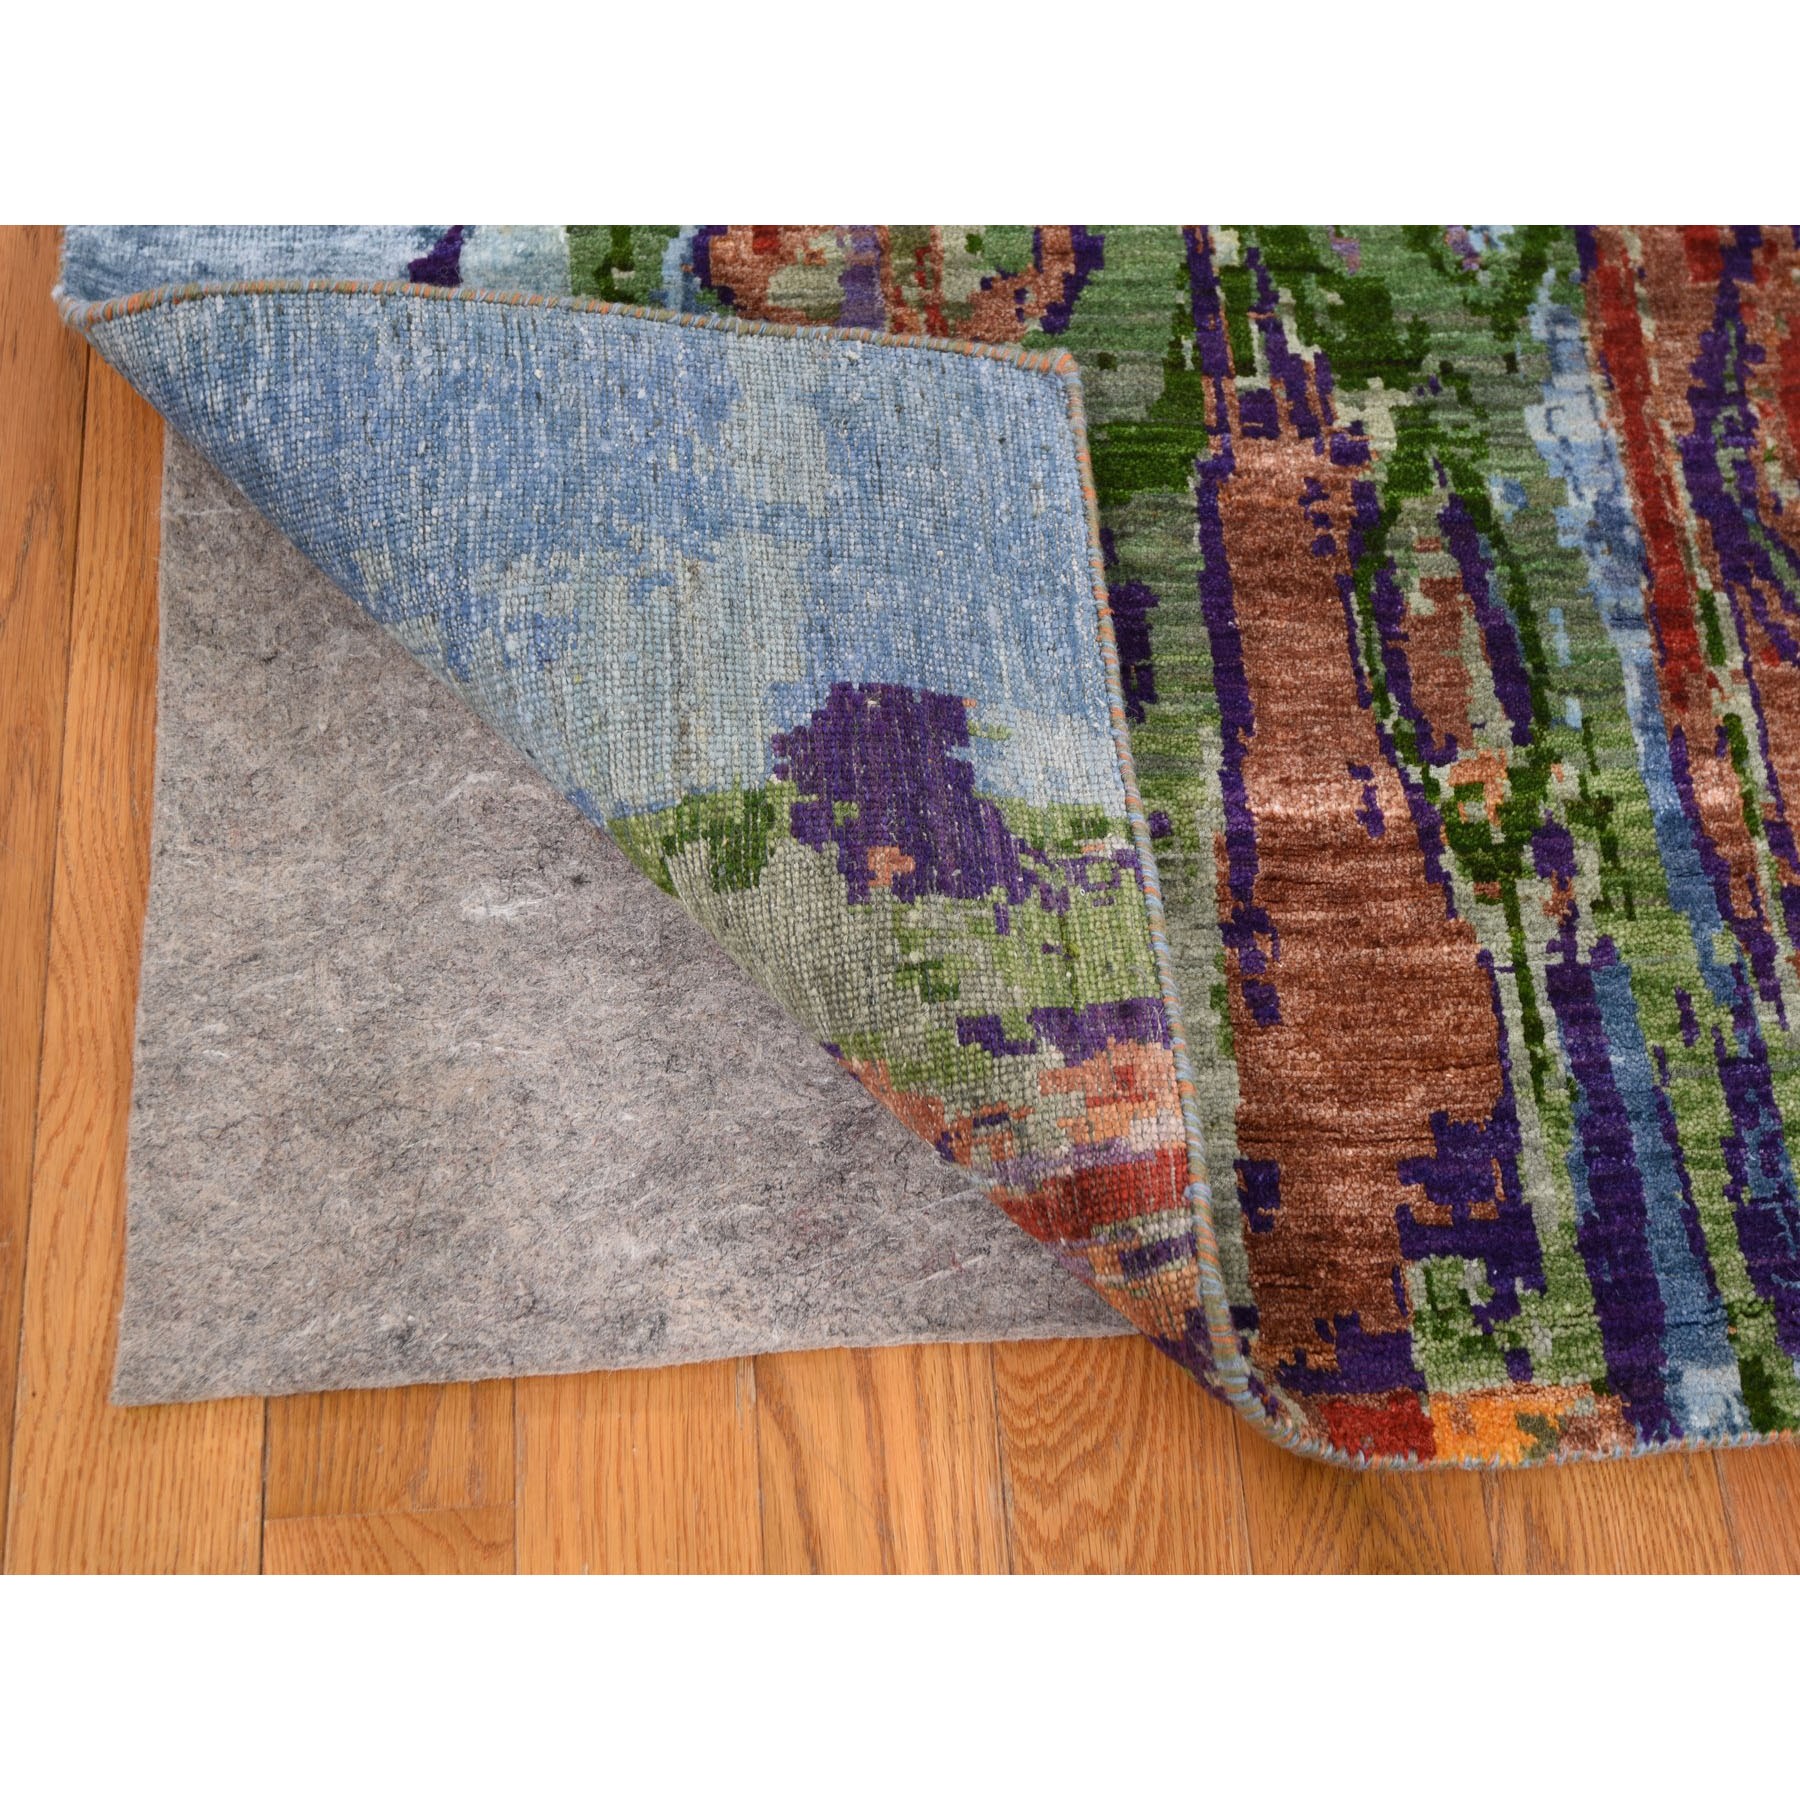 6-x9-2  THE DRENCHED FLOWERS Colorful Wool And Silk Hand Knotted Oriental Rug 